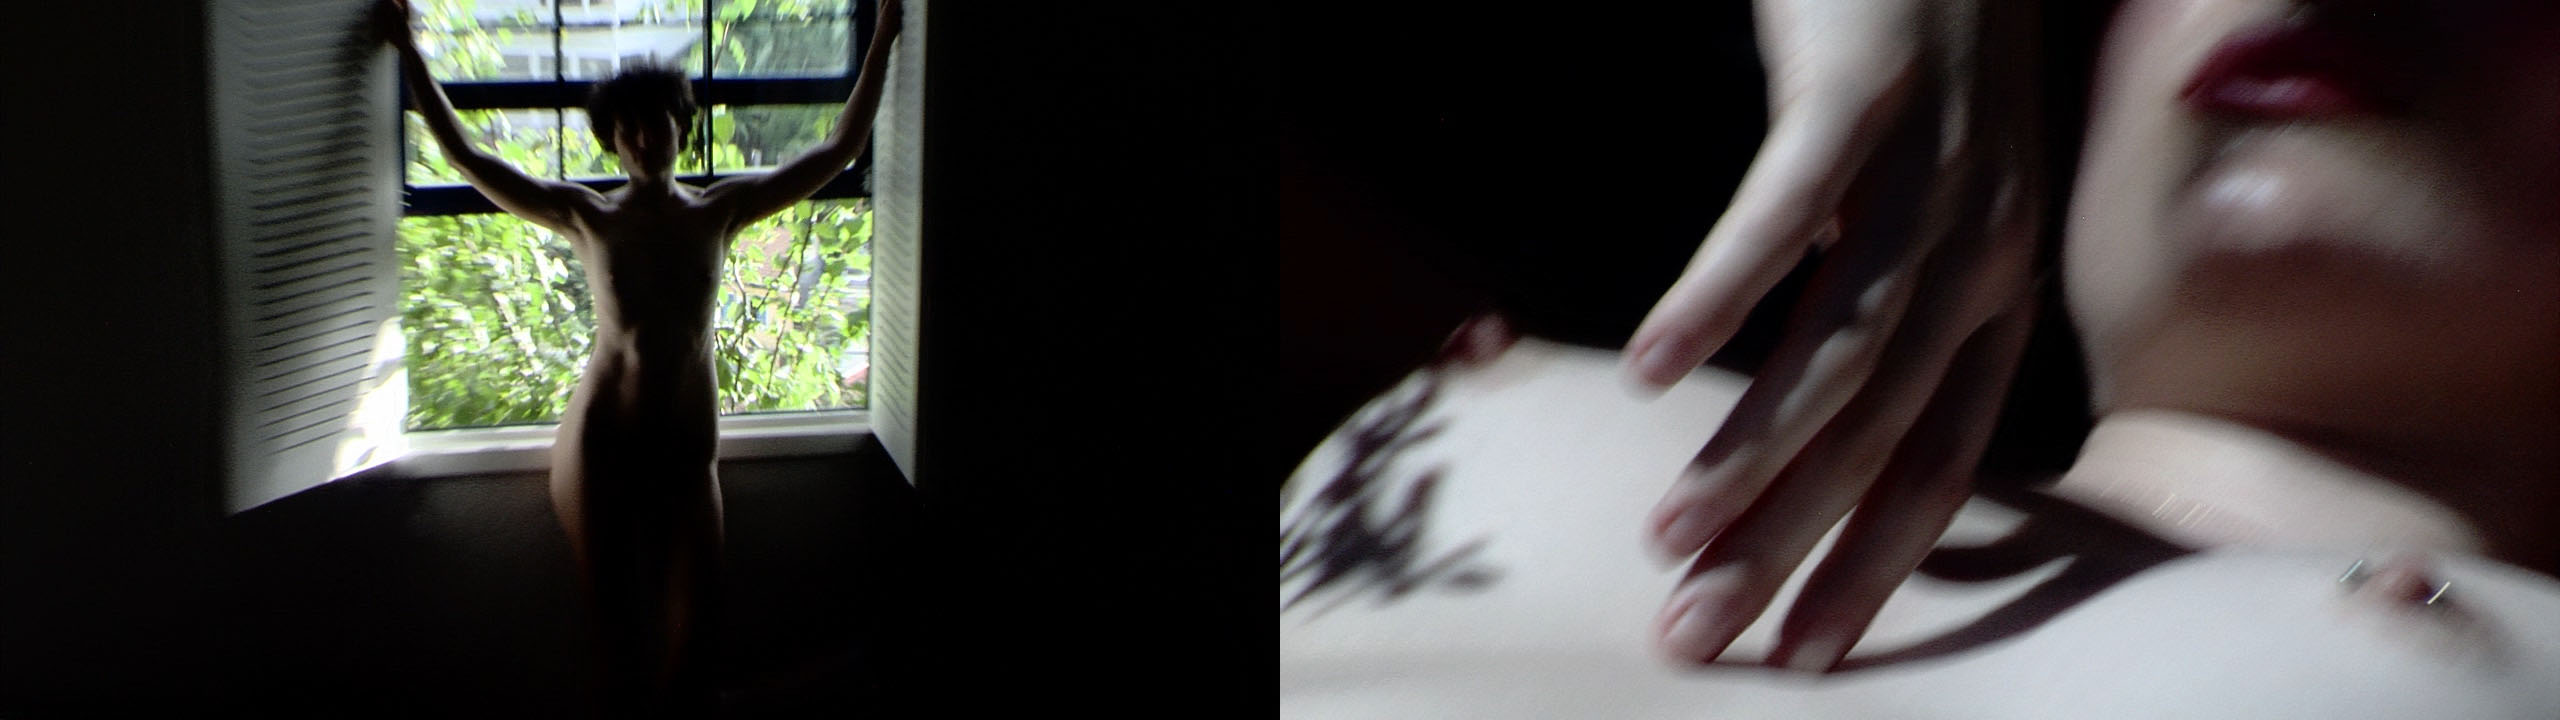 Left: You can see the slim, unclothed silhouette of Independent Escort Niki Blau in the backlight in front of an open window. Right: Detail of Niki Blau running her hand over her naked upper body in the sunlight.